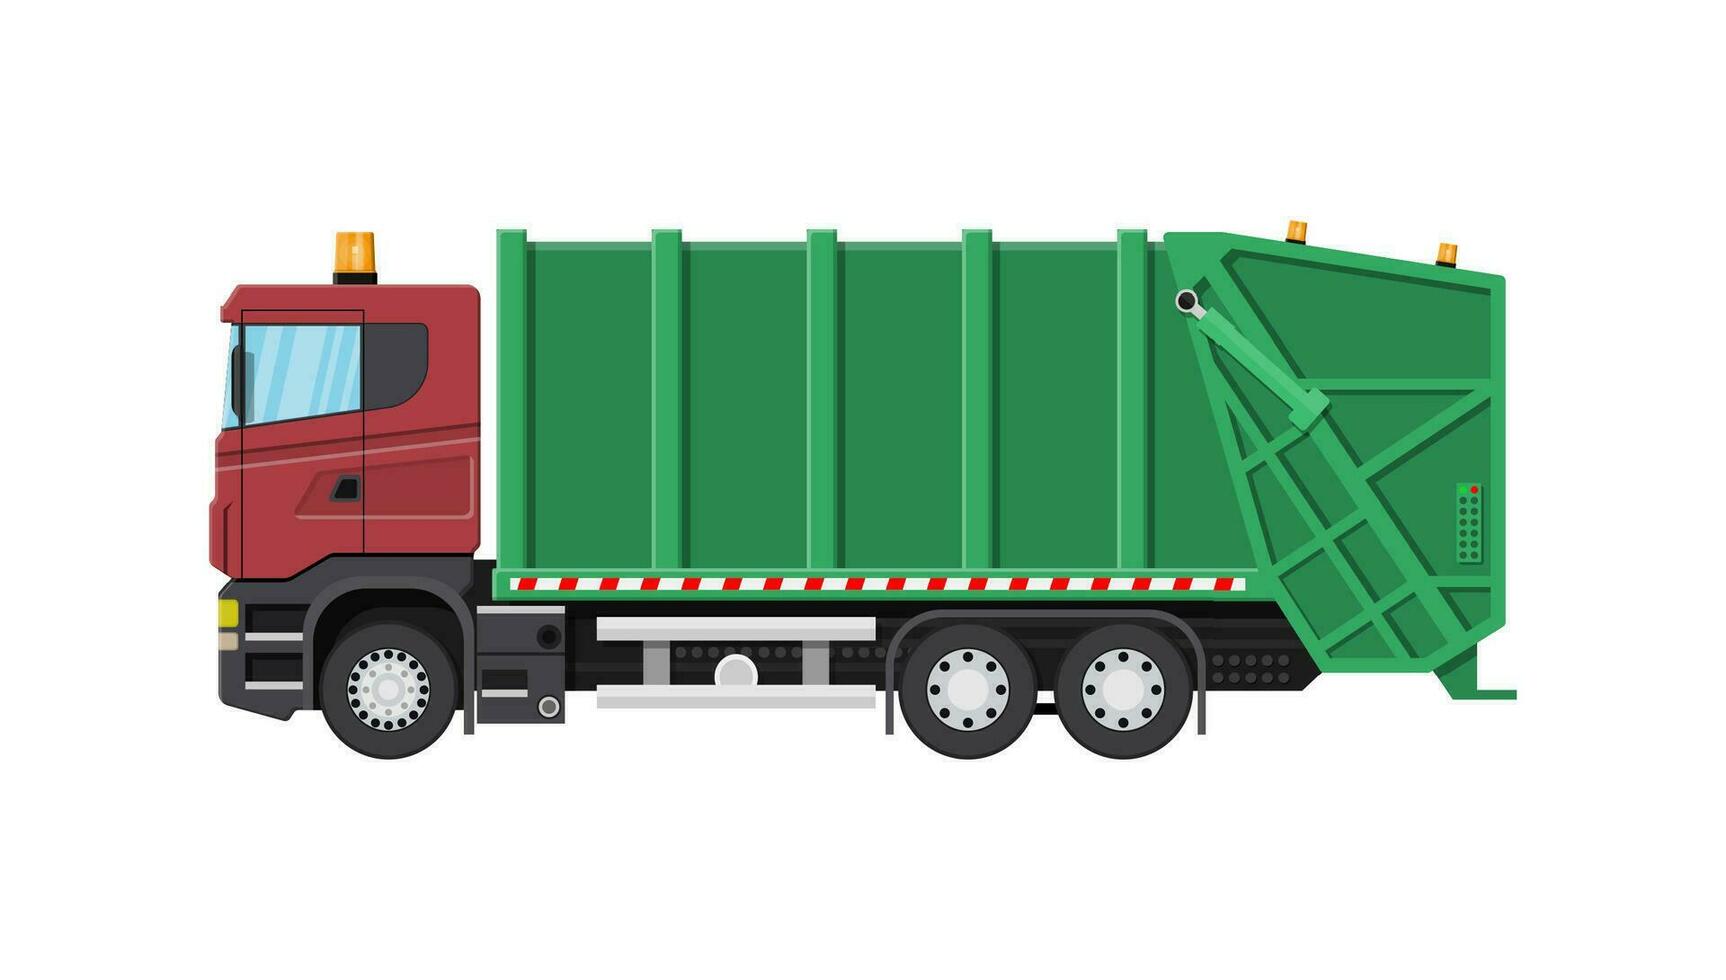 Truck for assembling and transportation garbage. Car waste disposal. Garbage recycling and utilization equipment. Waste management. Vector illustration in flat style